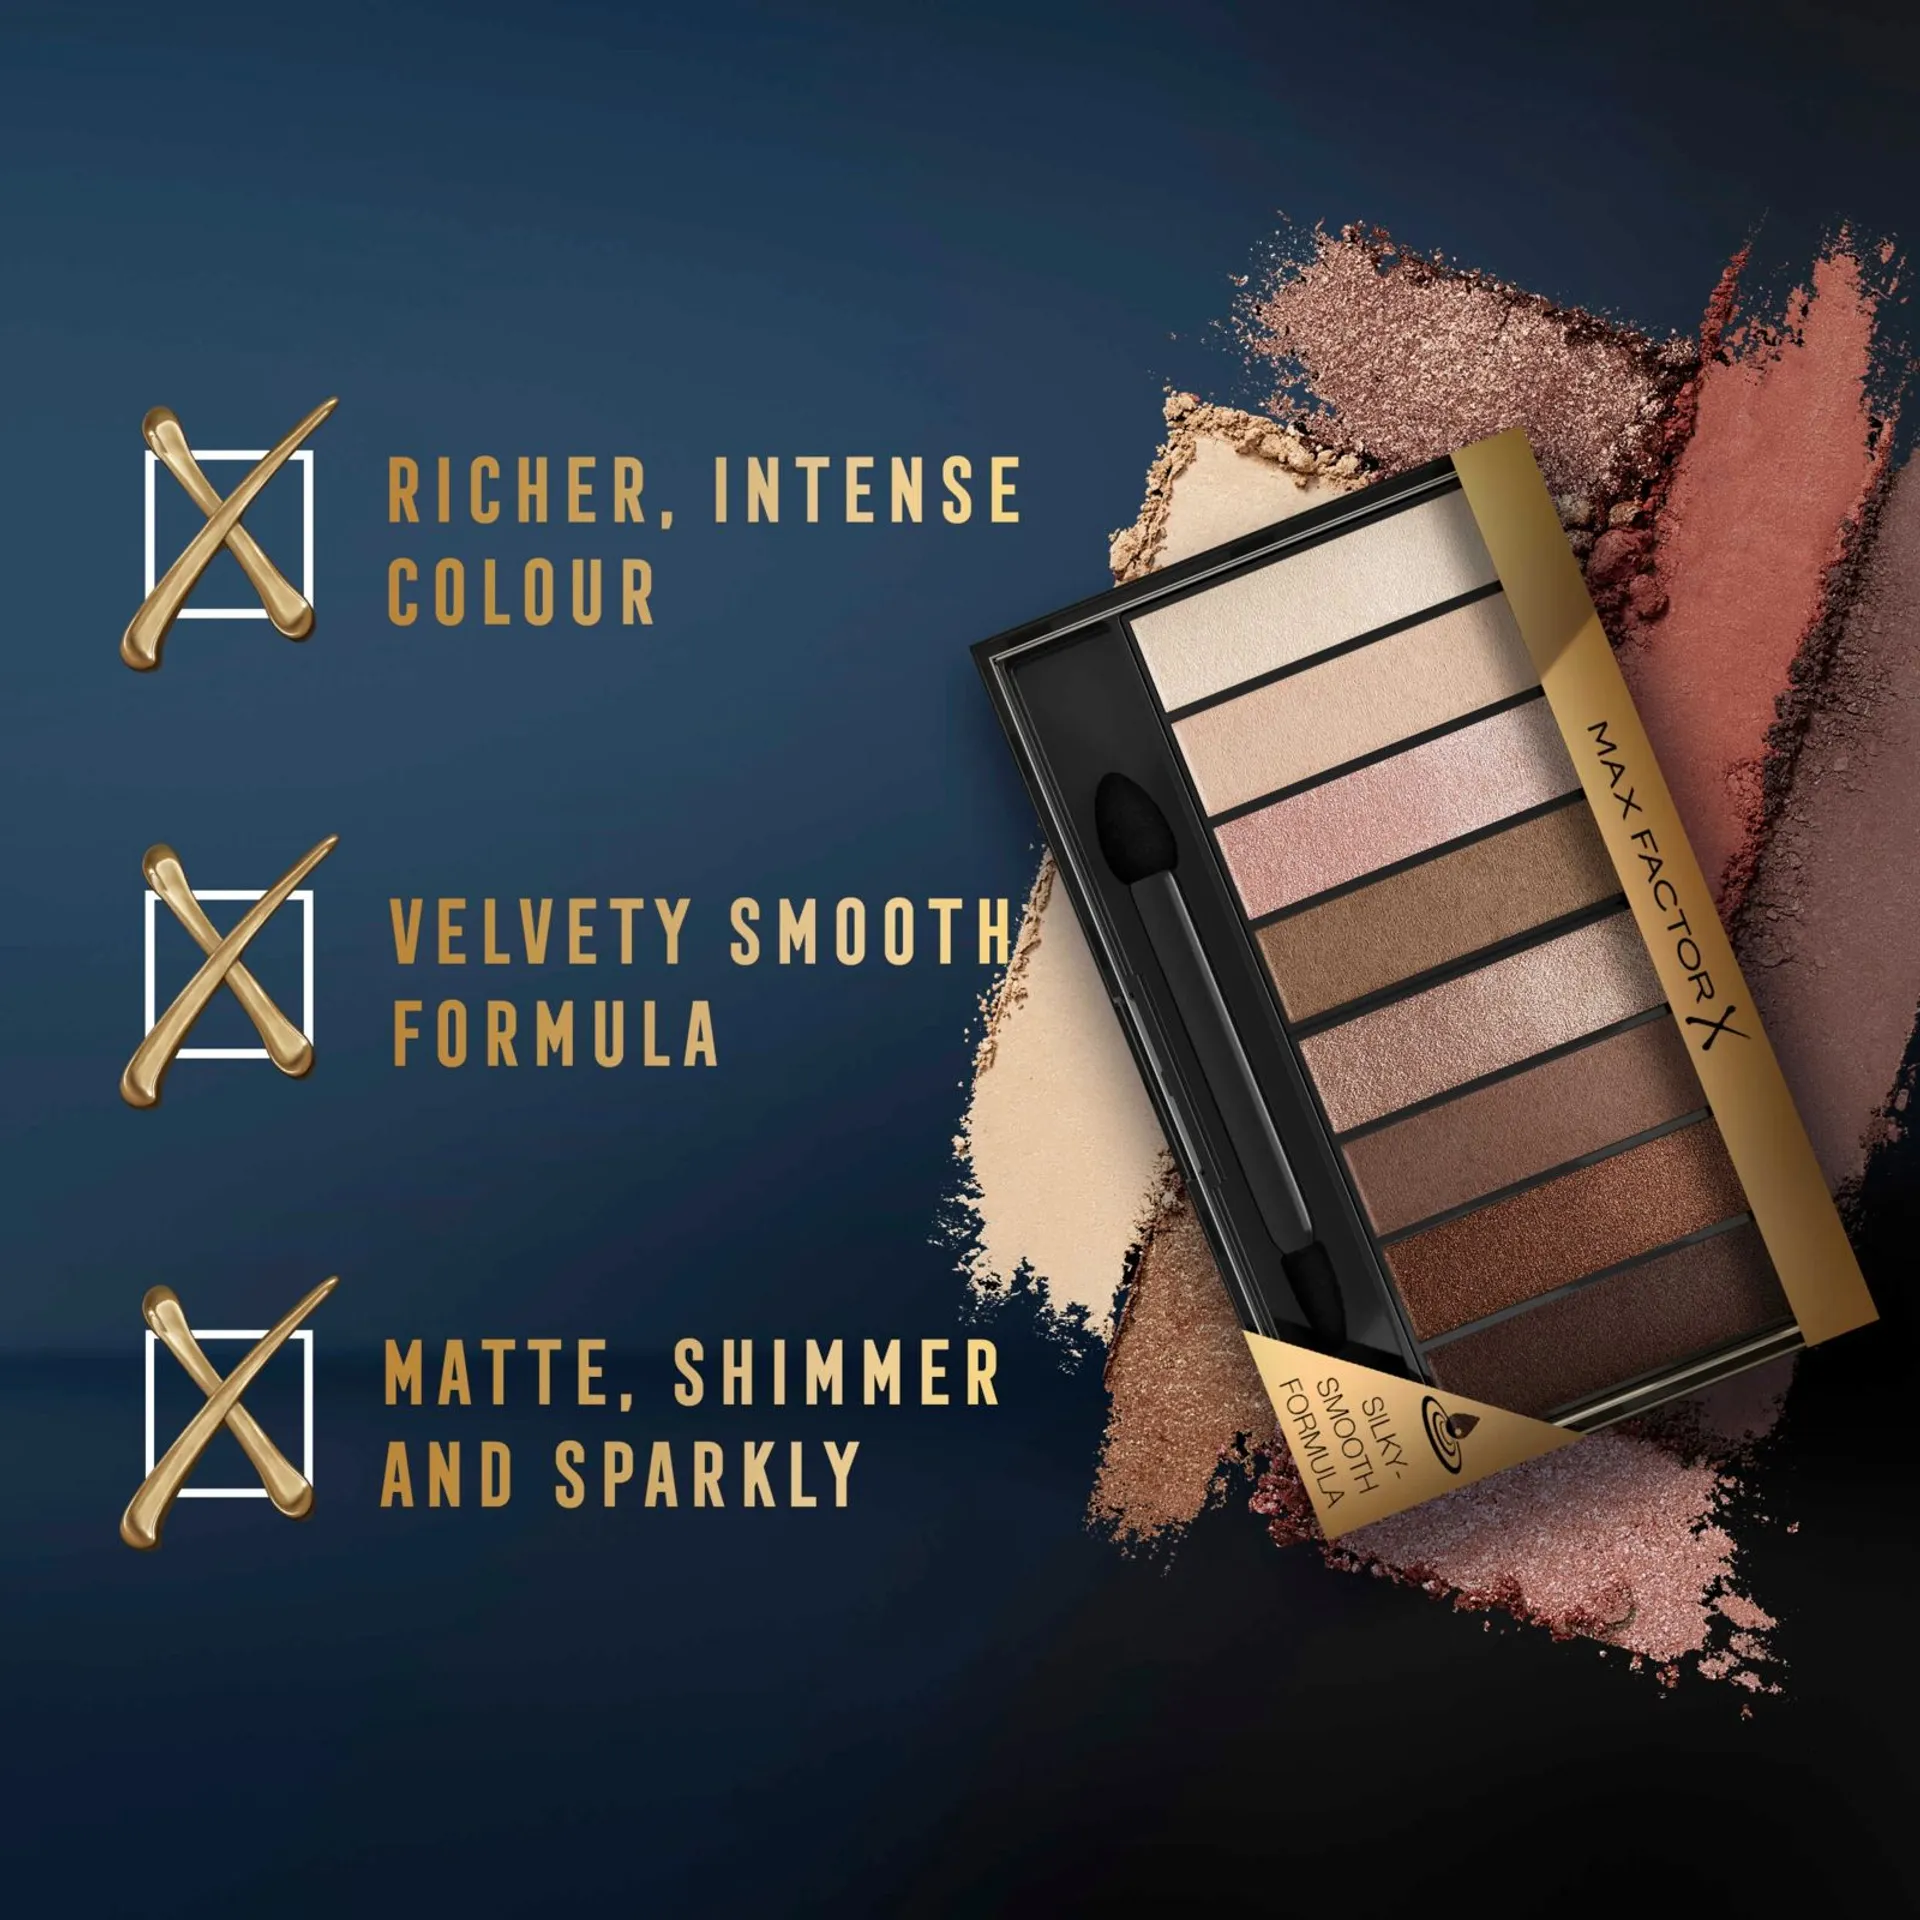 Max Factor Masterpiece Nude Palette 1 Cappuccino Nudes 6,5 g - 4